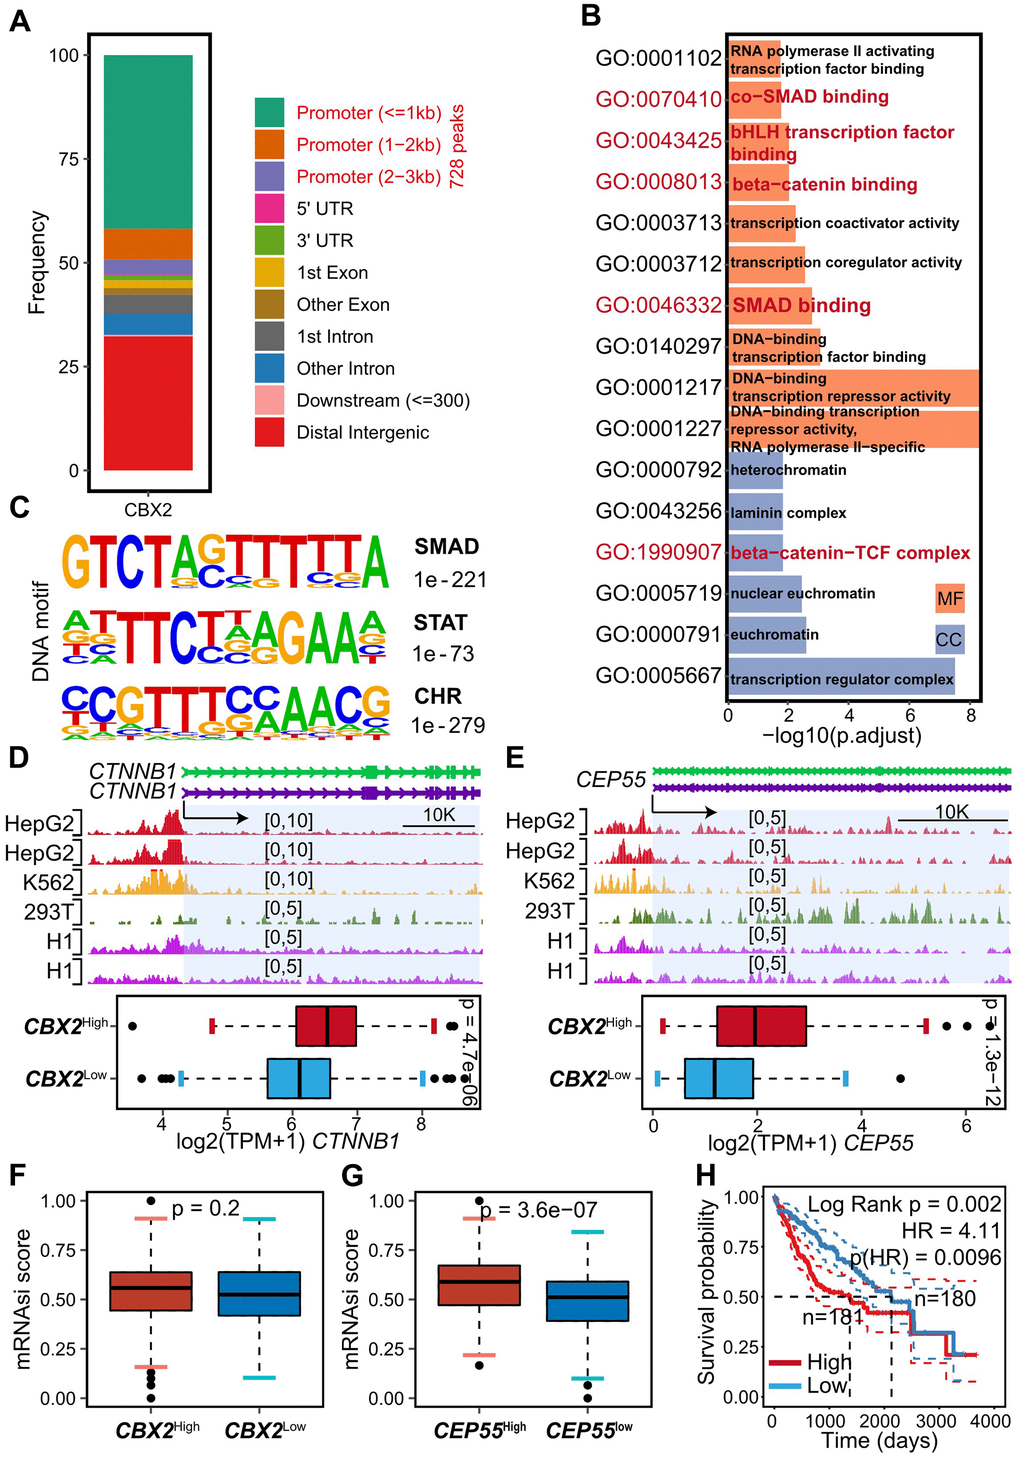 CBX2 regulated CEP55 and CTNNB1 directly. (A) Summary of genomic distribution of CBX2 peaks. (B) Enriched GO terms in genes associated with gene promoter CBX2 peaks. (C) DNA motifs enriched within genes associated with gene promoter CBX2 peaks determined by HOMER motif analysis. (D, E) Tracks of CBX2 peaks on CEP55 (D) loci and CTNNB1 (E) loci and the corresponding expression between CBX2-statified tumors. Statistical significance was calculated using the two-sided Wilcoxon test. (F, G) mRNAsi distribution between CBX2-stratified (F) and CEP55-stratified (G) tumors. Statistical significance was calculated using the two-sided Wilcoxon test. (H) Kaplan-Meier plots of mRNAsi. The high and low group was classified with the median of risk score. P-value was computed with log-rank test.